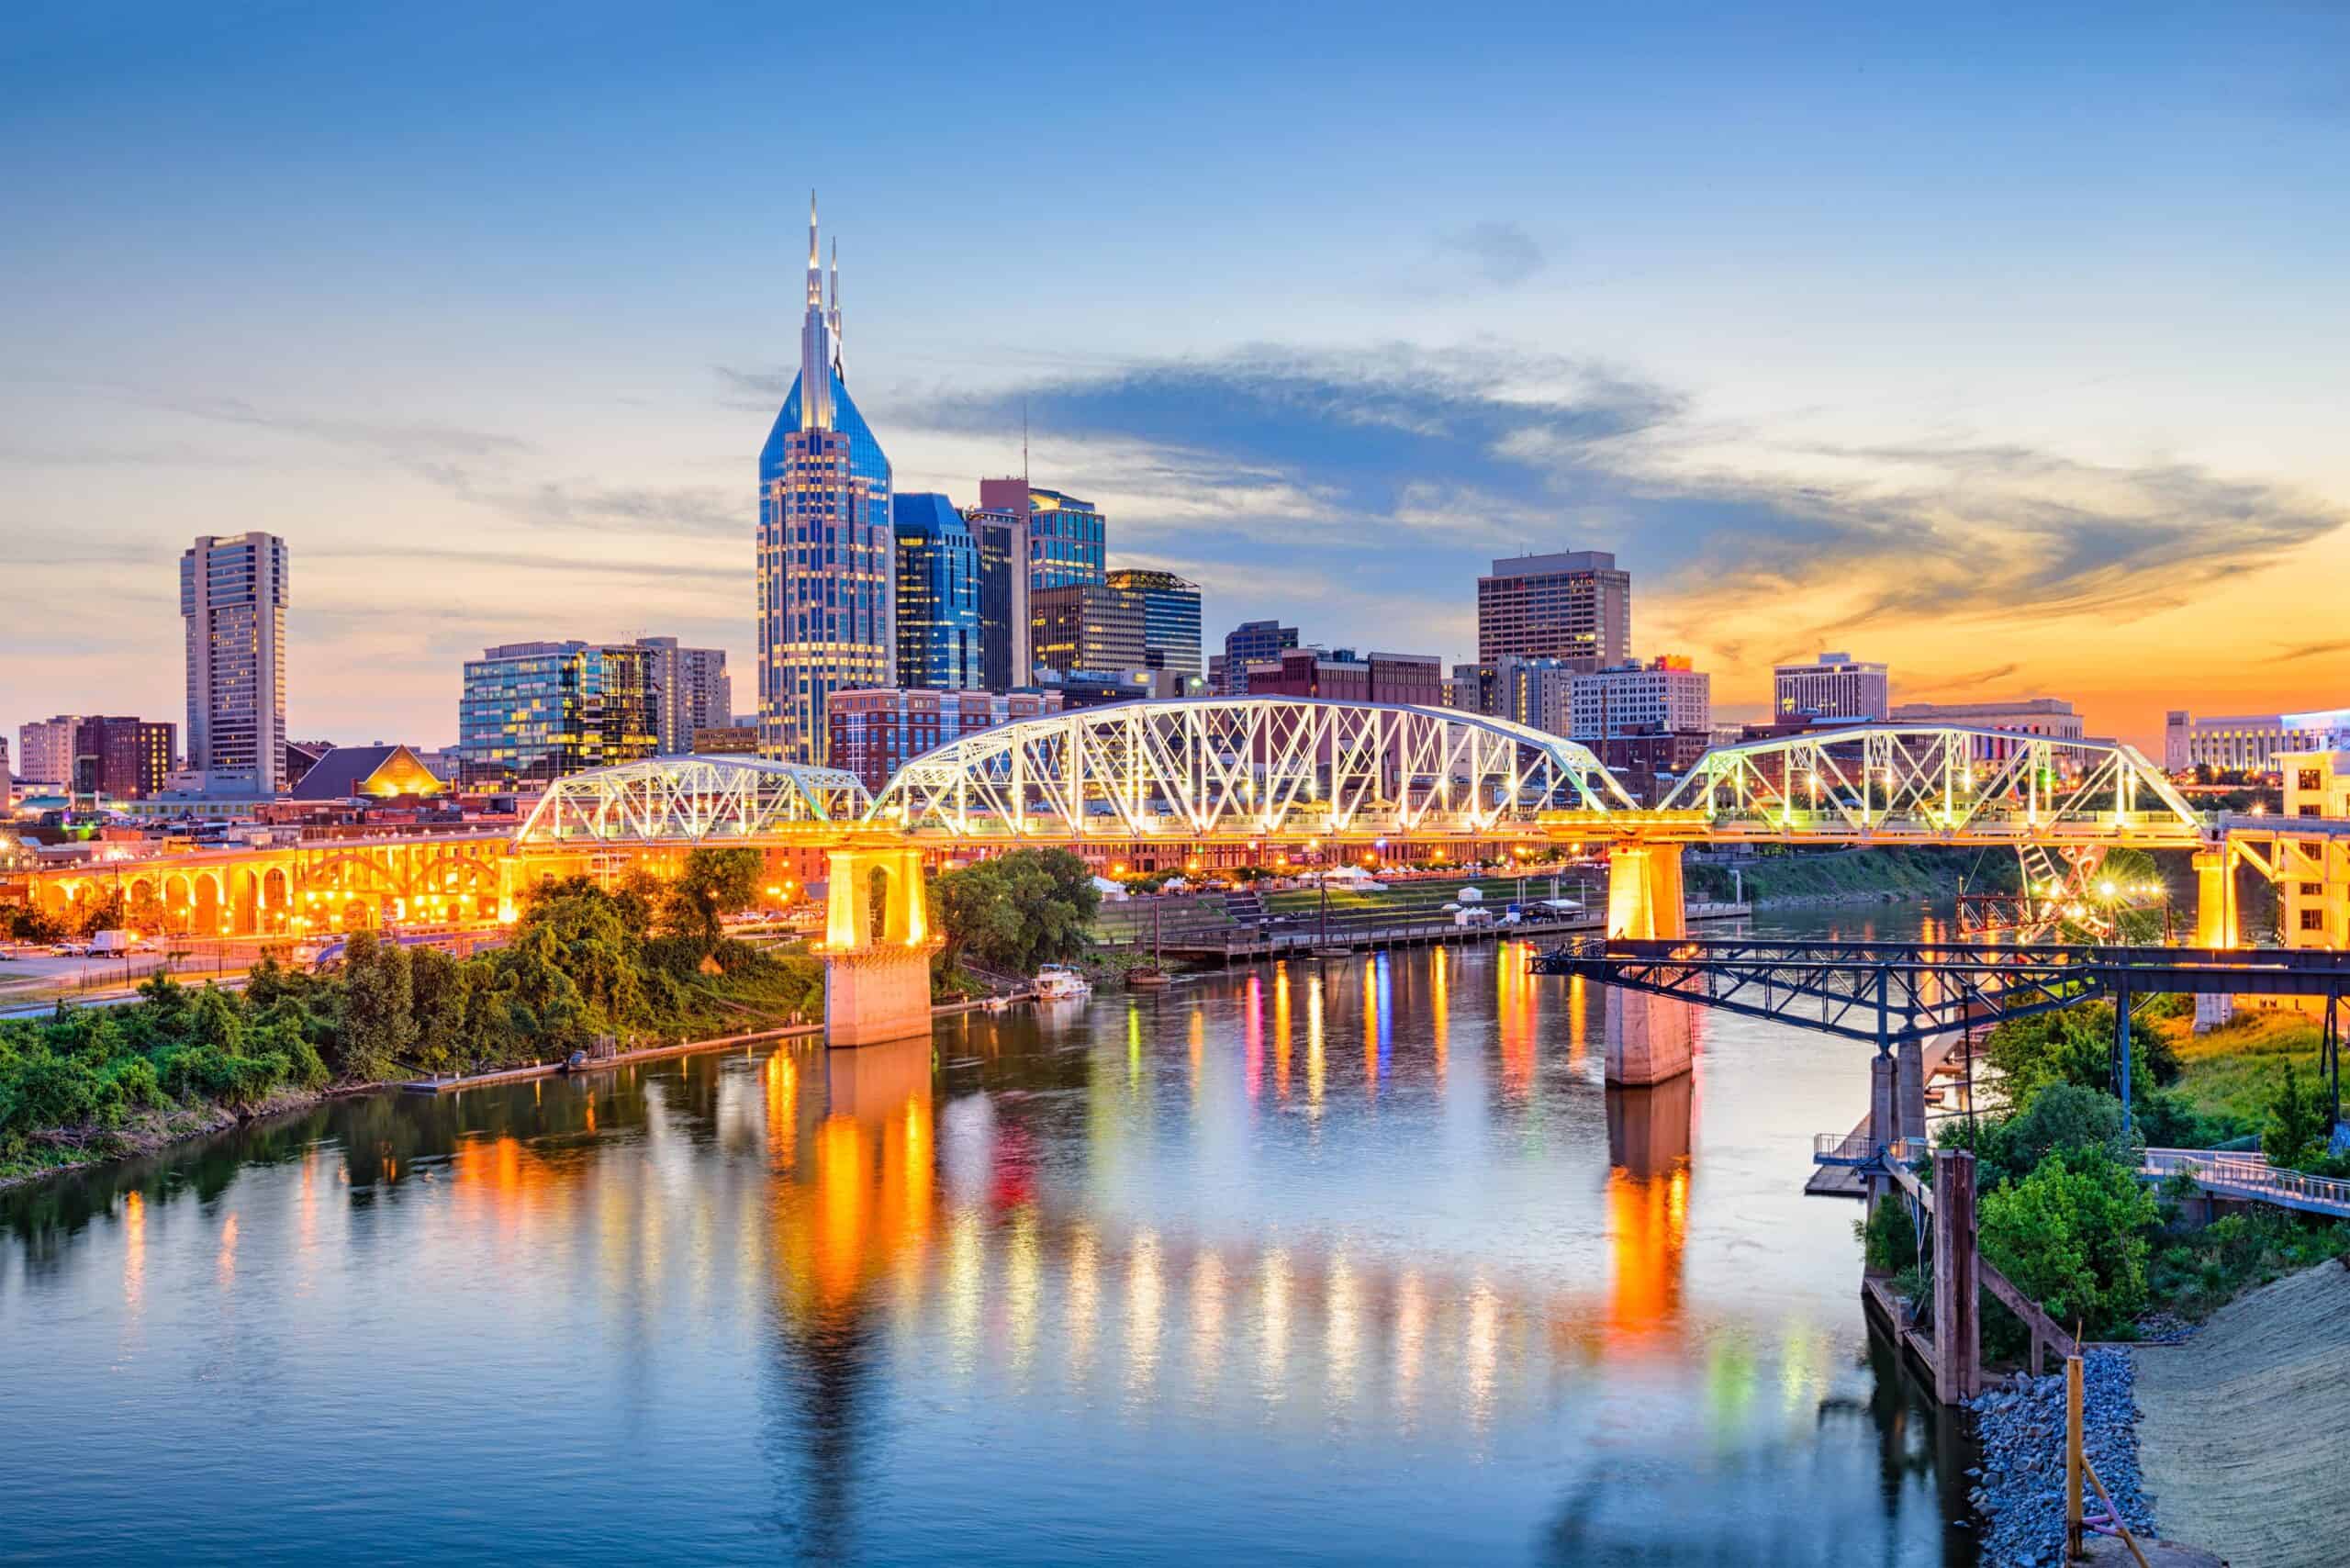 Tennessee state image | Nashville, Tennessee, USA